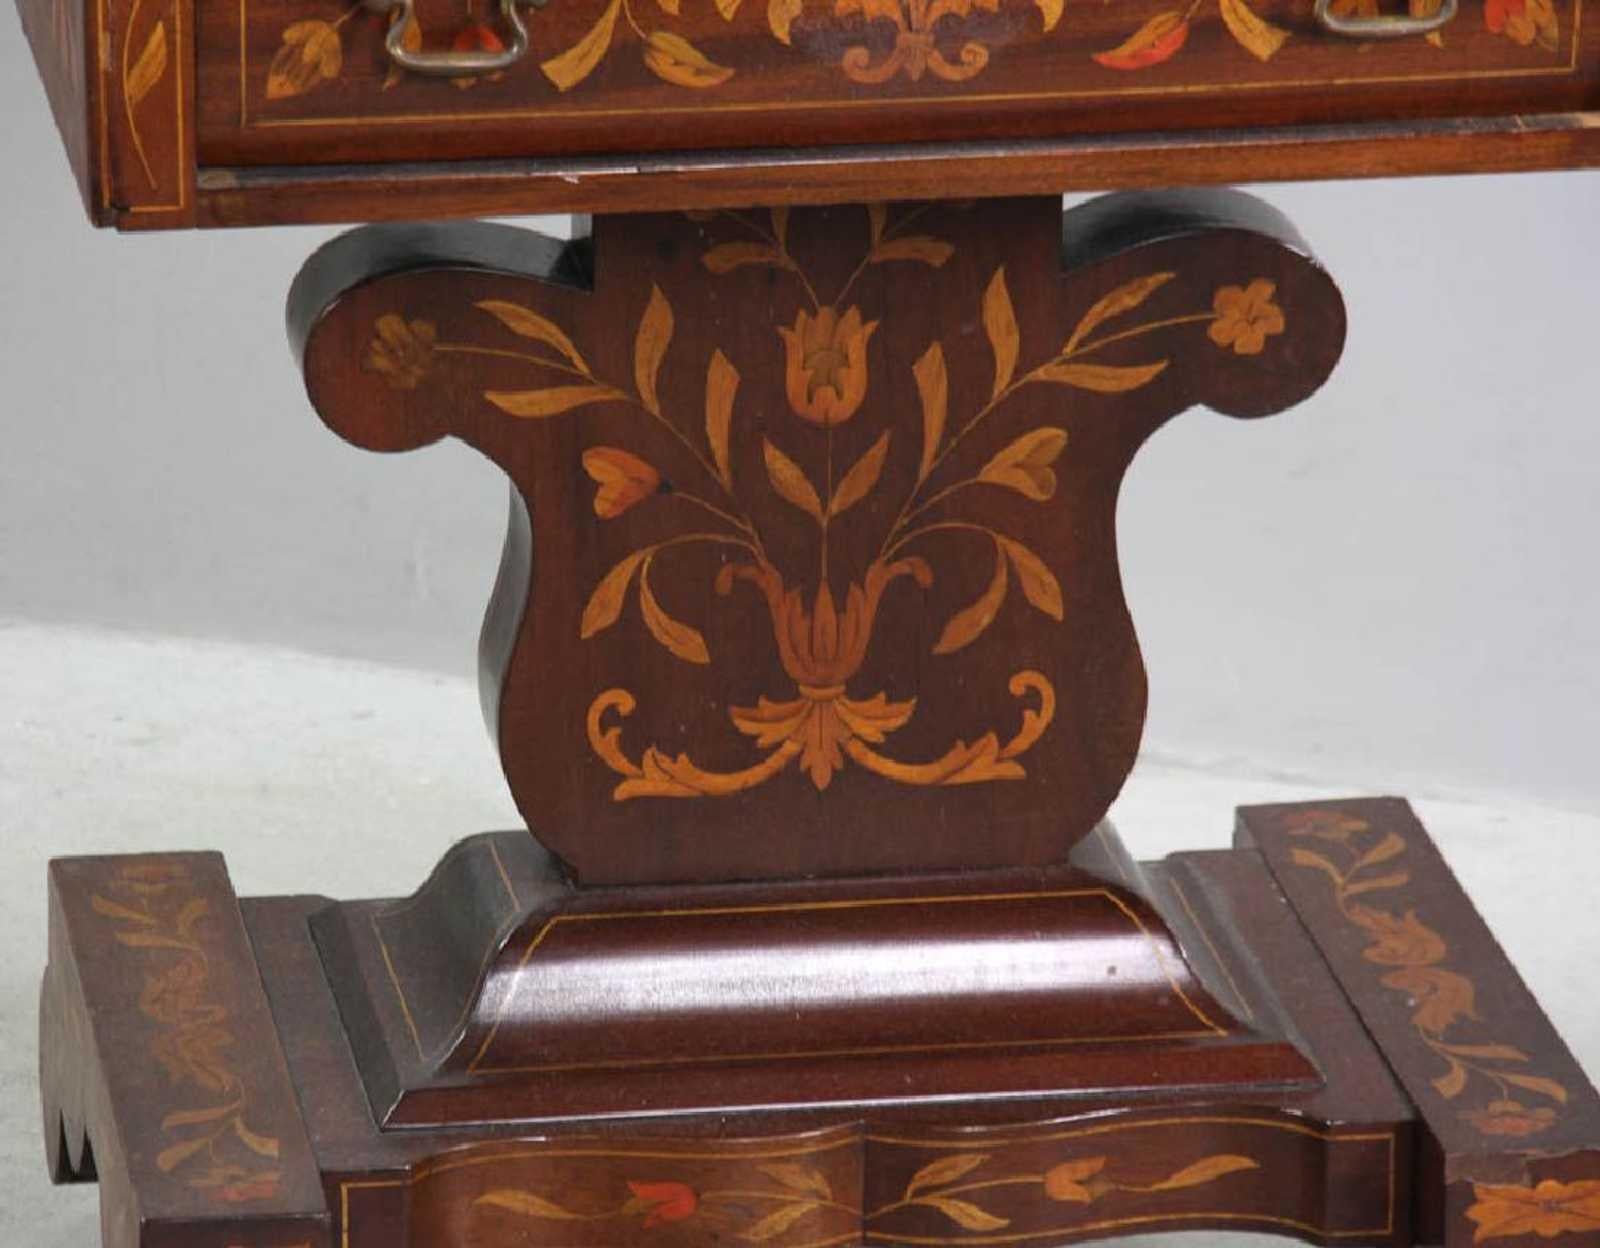 Dutch Empire marquetry stand in mahogany and fruitwood, circa 1840. Wonderful foliate inlay with bordered edges and a butterfly on the top of the piece. Opens with original brass bail handle pulls. Stand sits atop four caster wheels which move